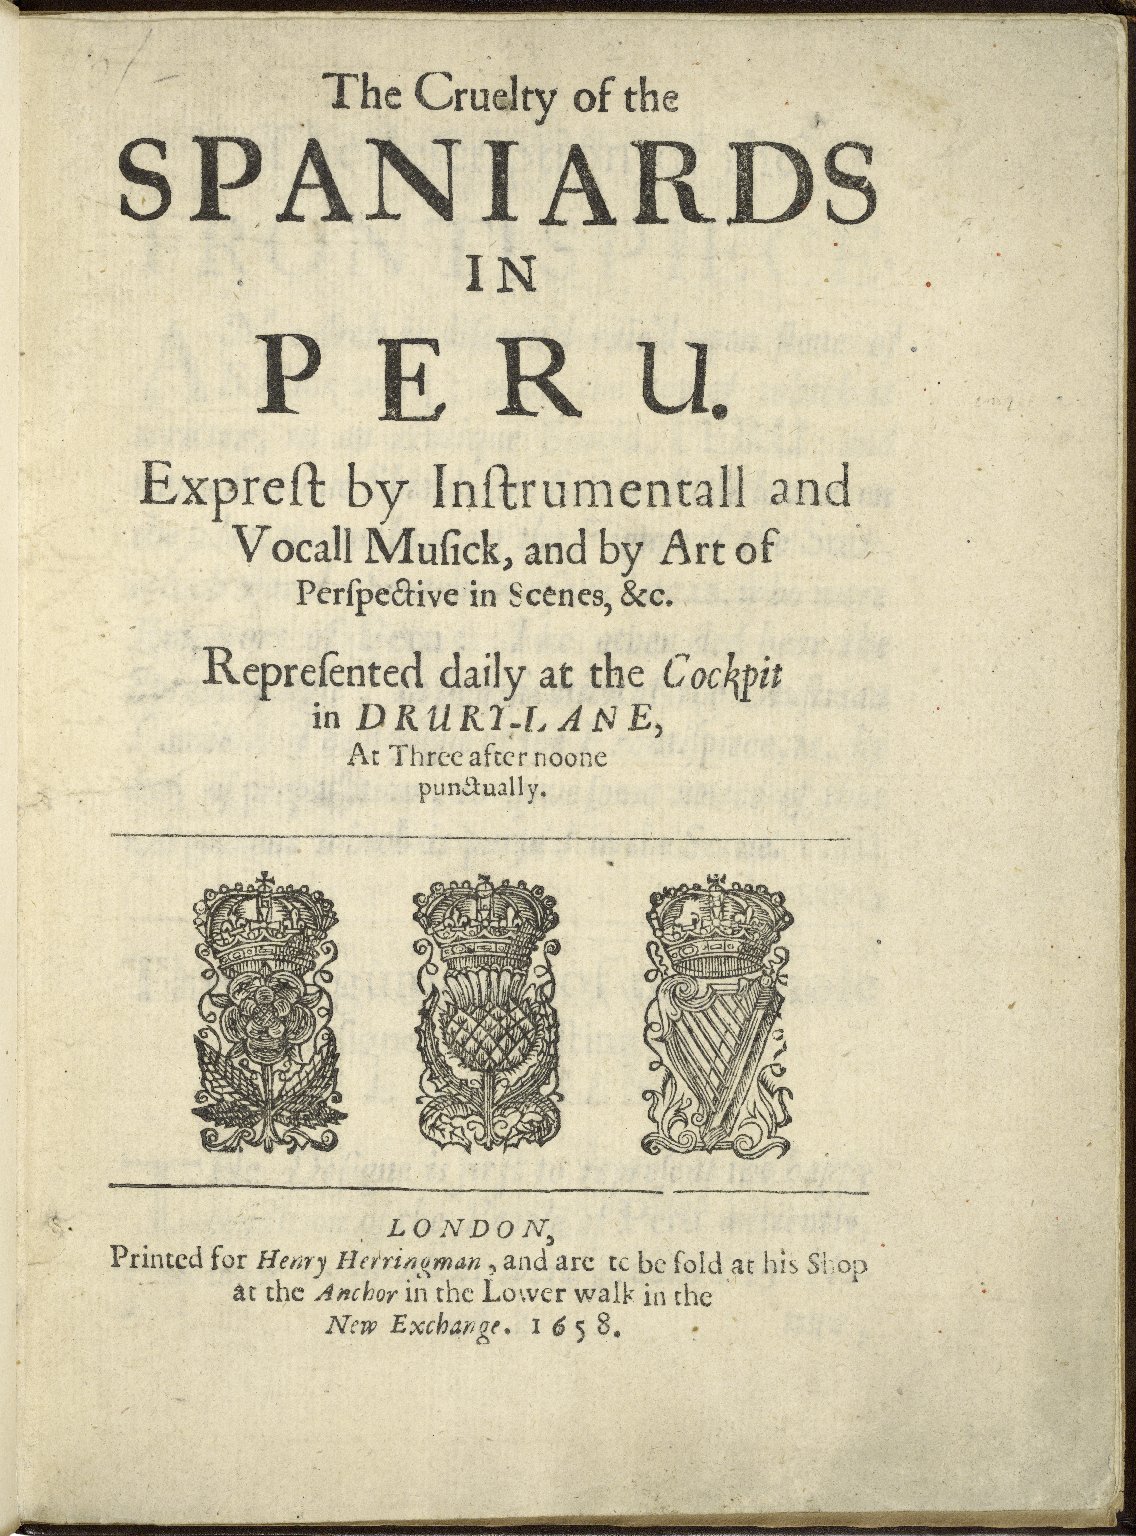 Title page of The Cruelty of the Spaniards in Peru (1658). Image courtesy of LUNA at the Folger Shakespeare Library.